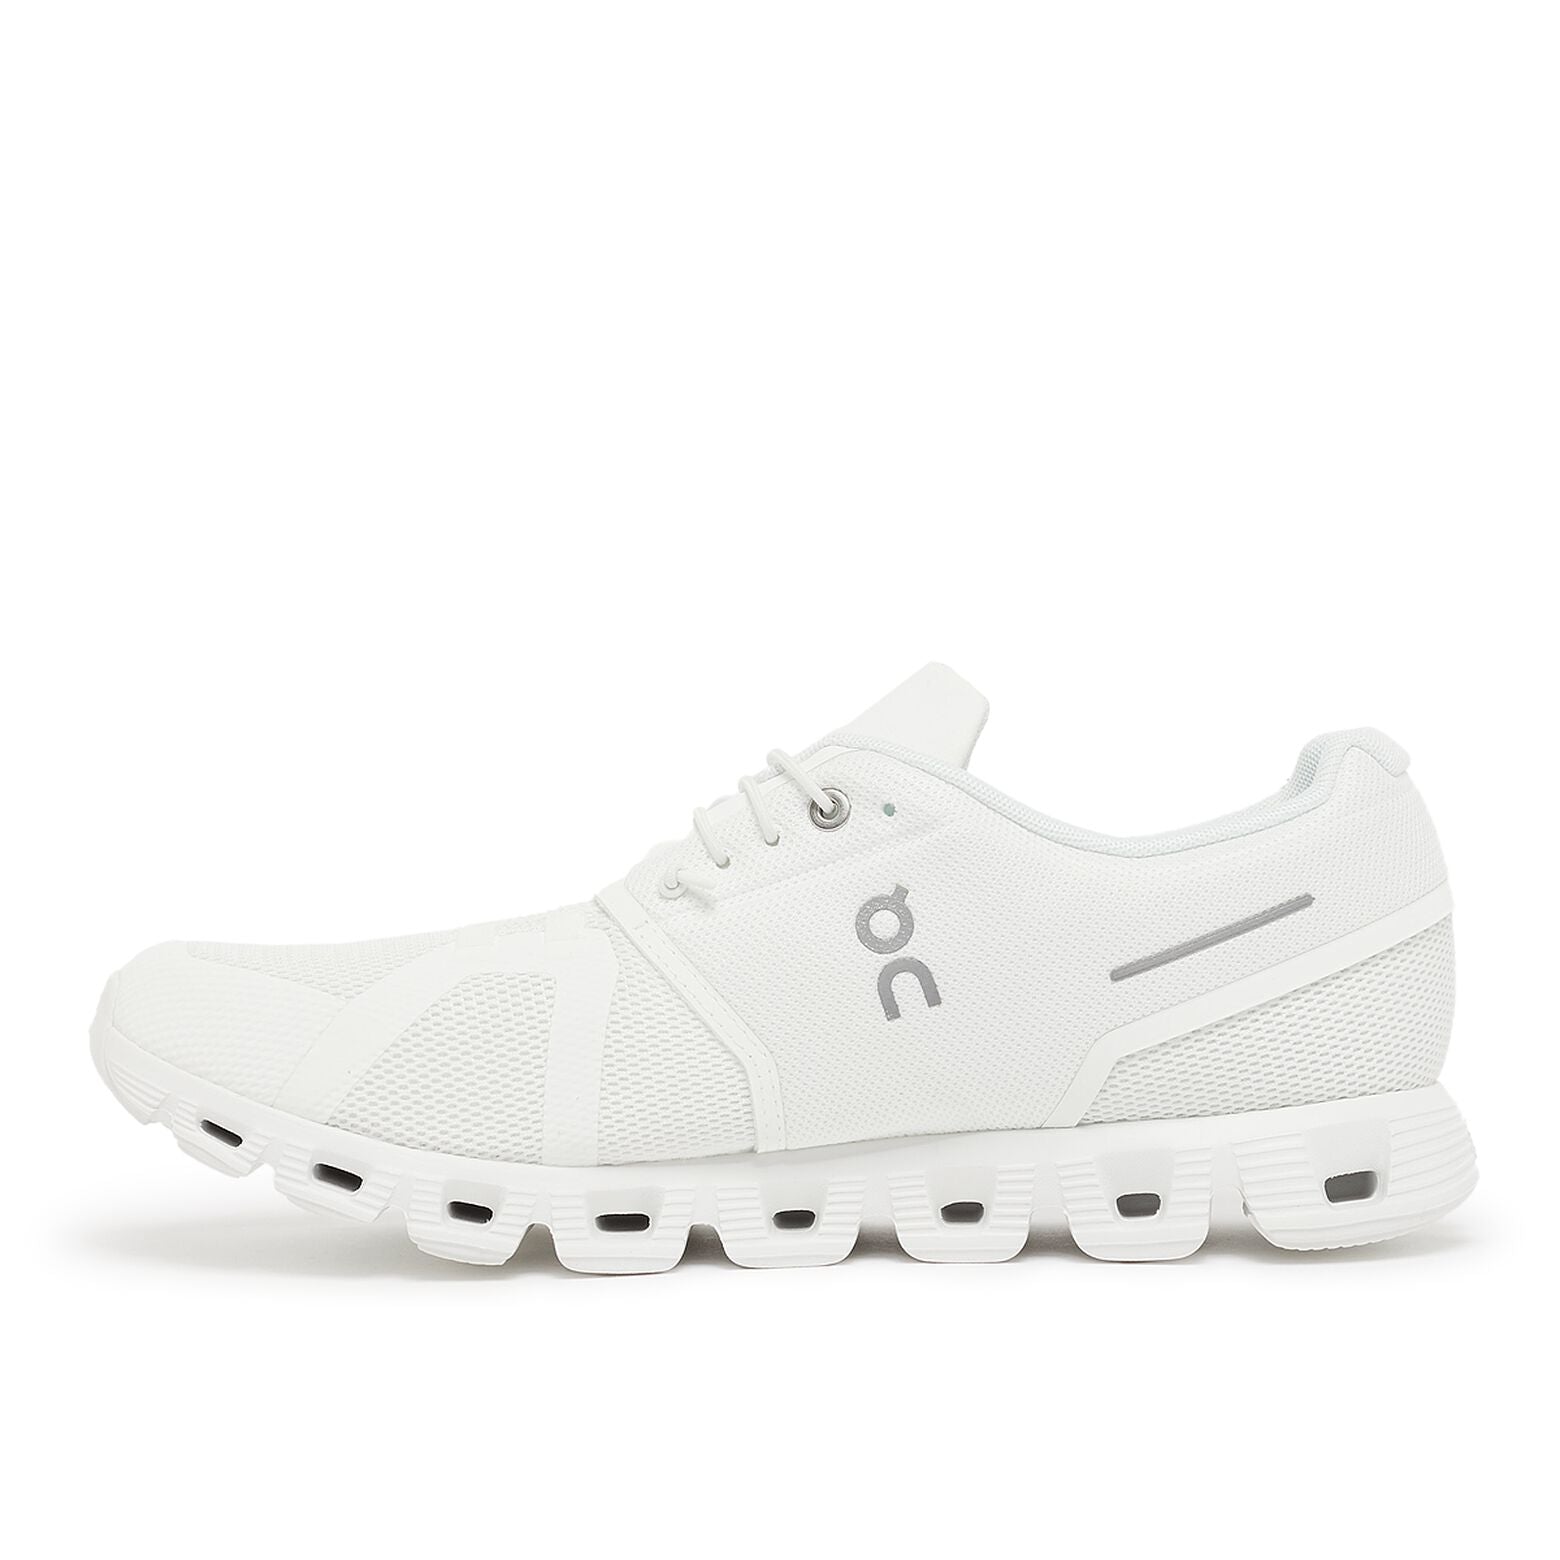 Medial view of the Men's ON Cloud 5 in the color Undyed White/White